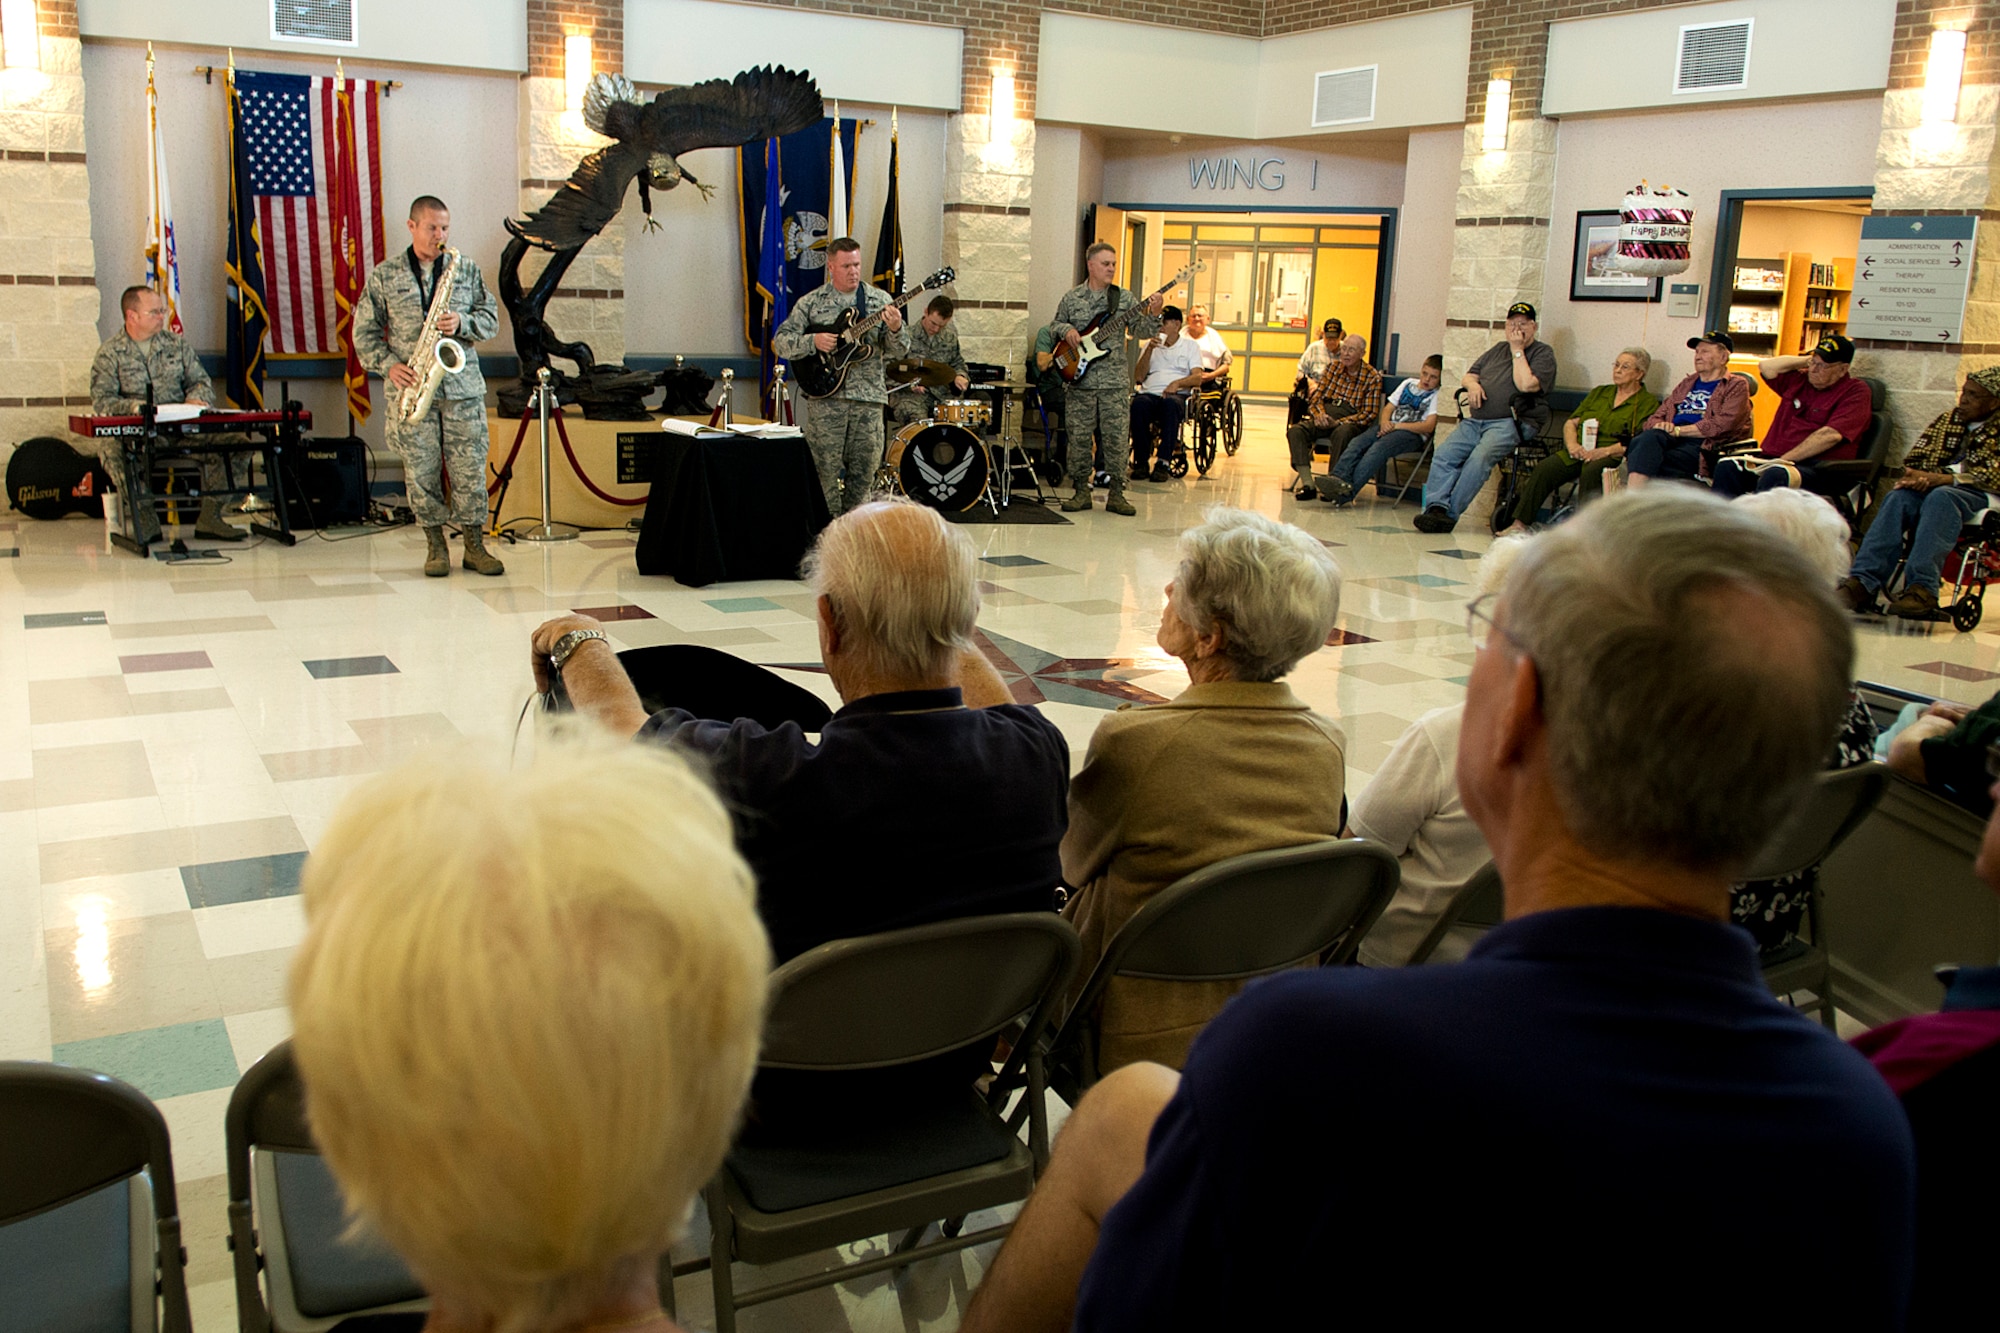 Members of the U.S. Air Force Band of the West perform for a group of veterans at the Northwest Louisiana Veterans Home, Nov. 6, 2012, Bossier City, La. Performing are Master Sgt. Neill Herndon, piano, Staff Sgt. Cody Brown, saxophone, Master Sgt. Steve Wilson, guitar, Airman 1st Class Mark Wheeler, drums, and Master Sgt. Doug Bennent. (U.S. Air Force photo by Master Sgt. Greg Steele/Released)